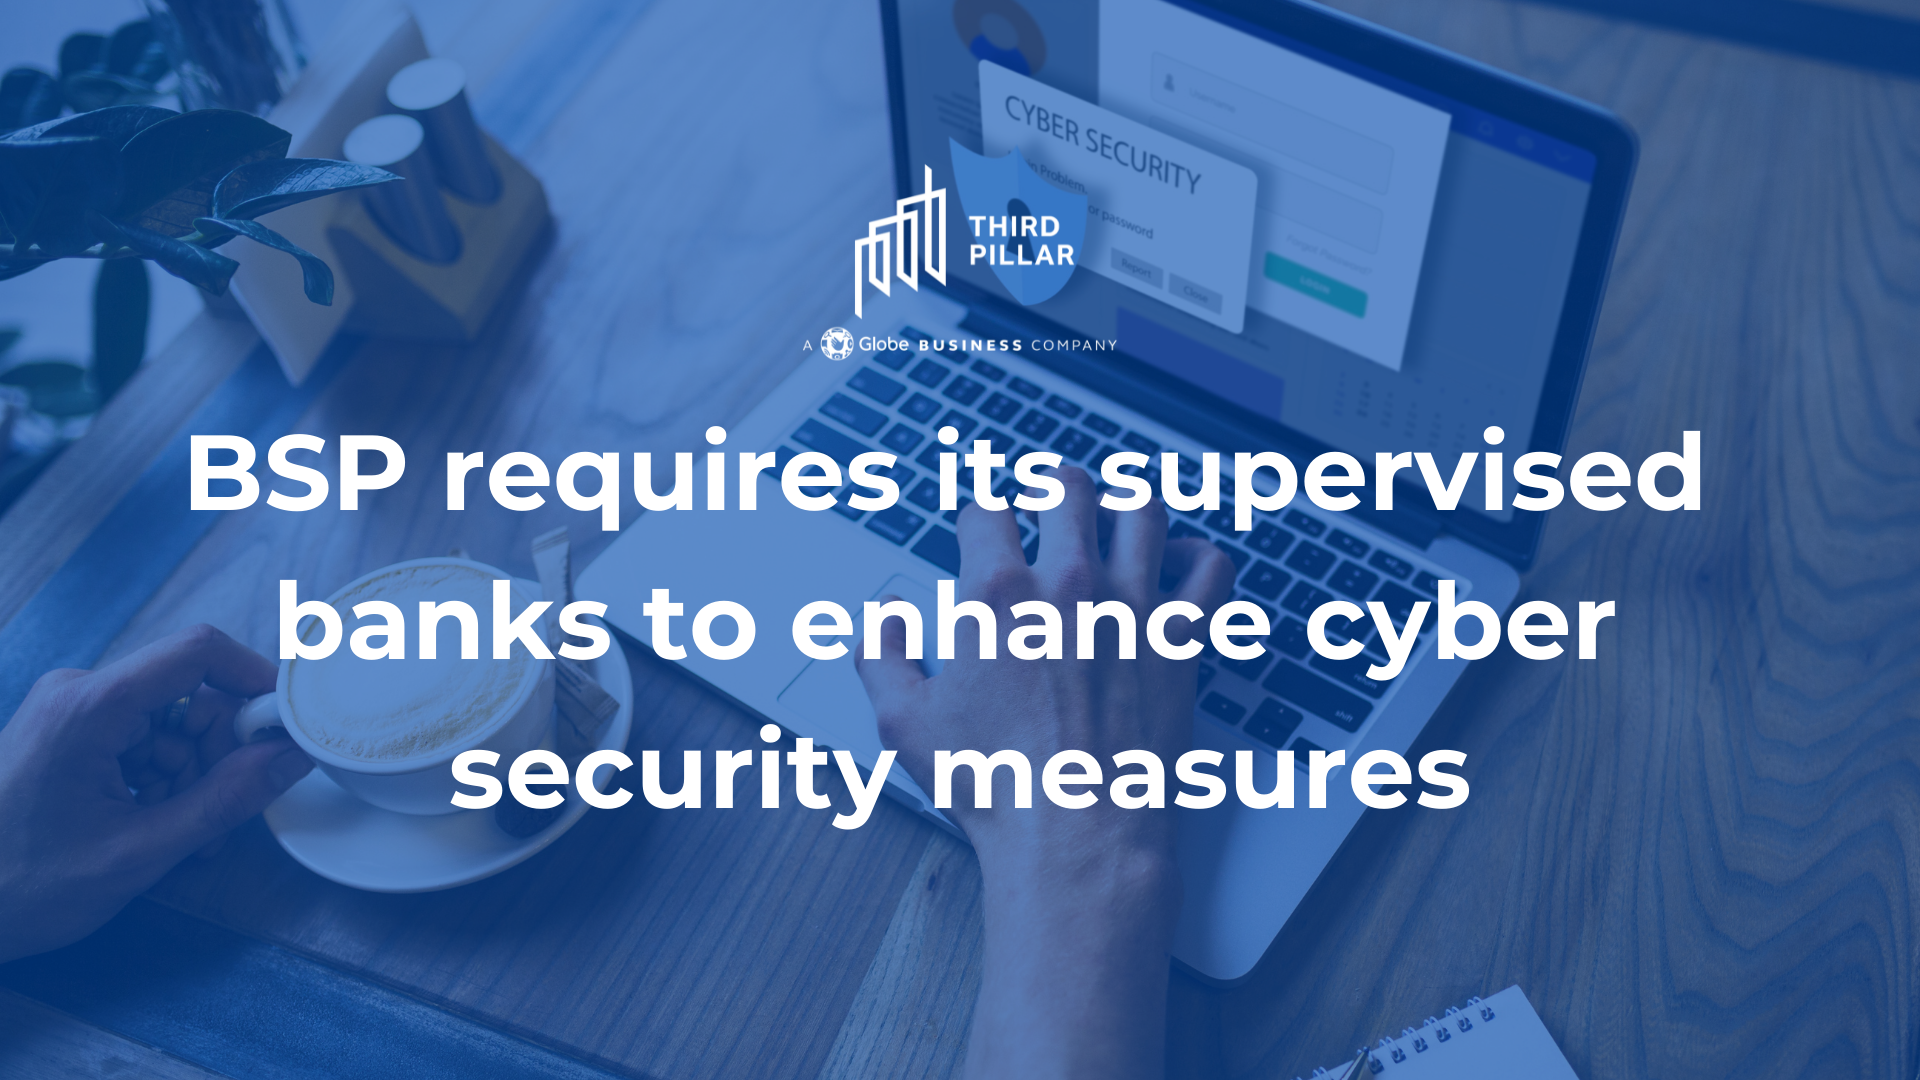 BSP requires its supervised banks to enhance cyber security measures